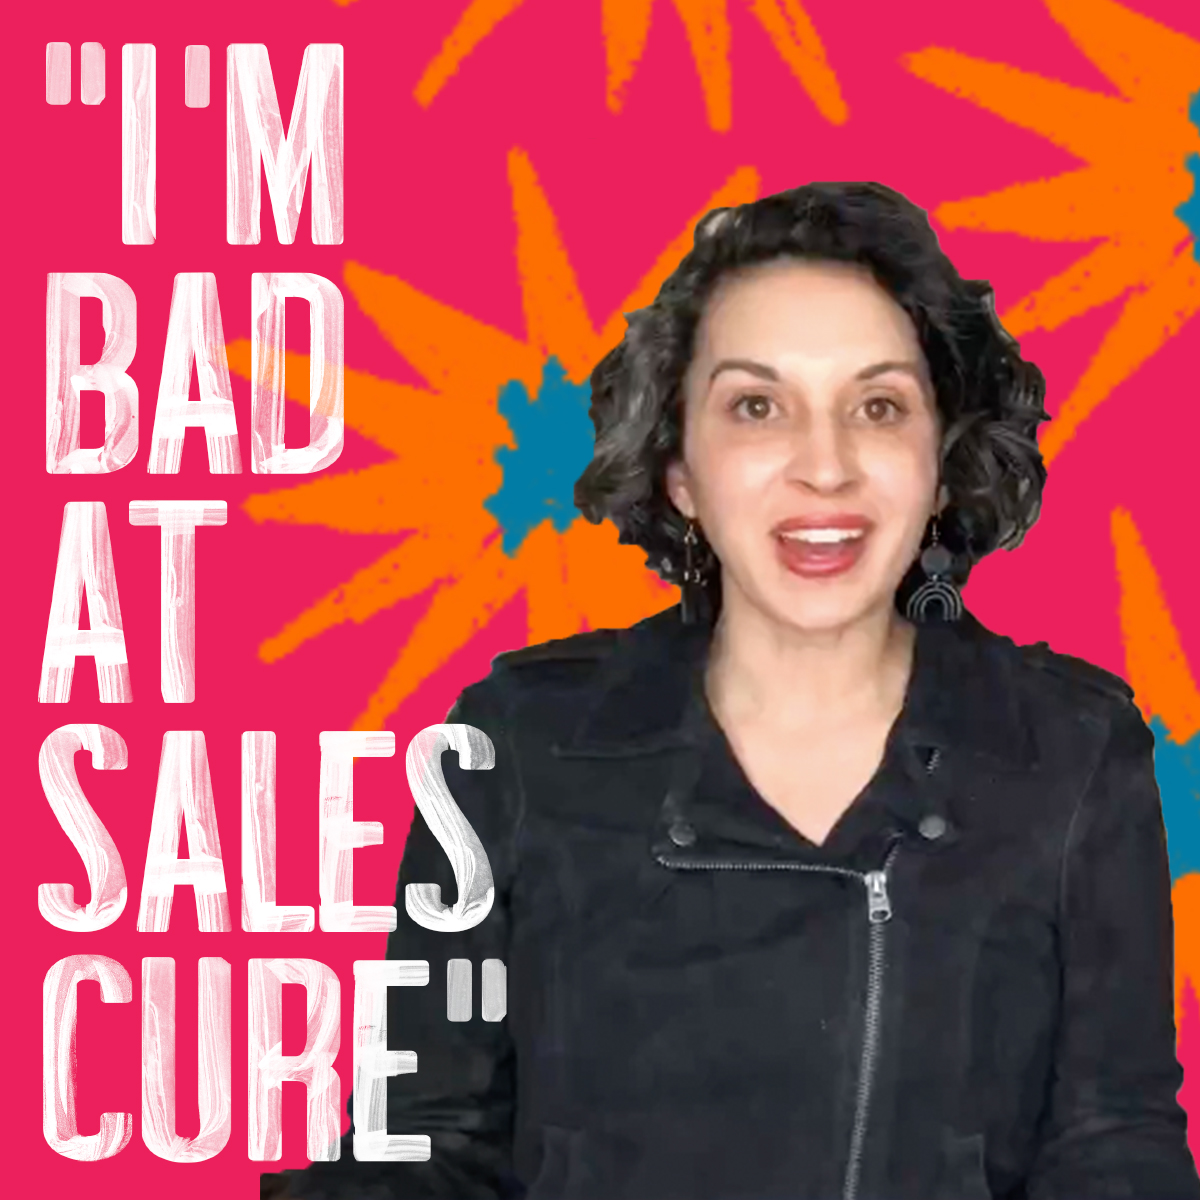 Landing 3 Clients in 30 Days Part 3: “I’m Bad at Sales” Cure